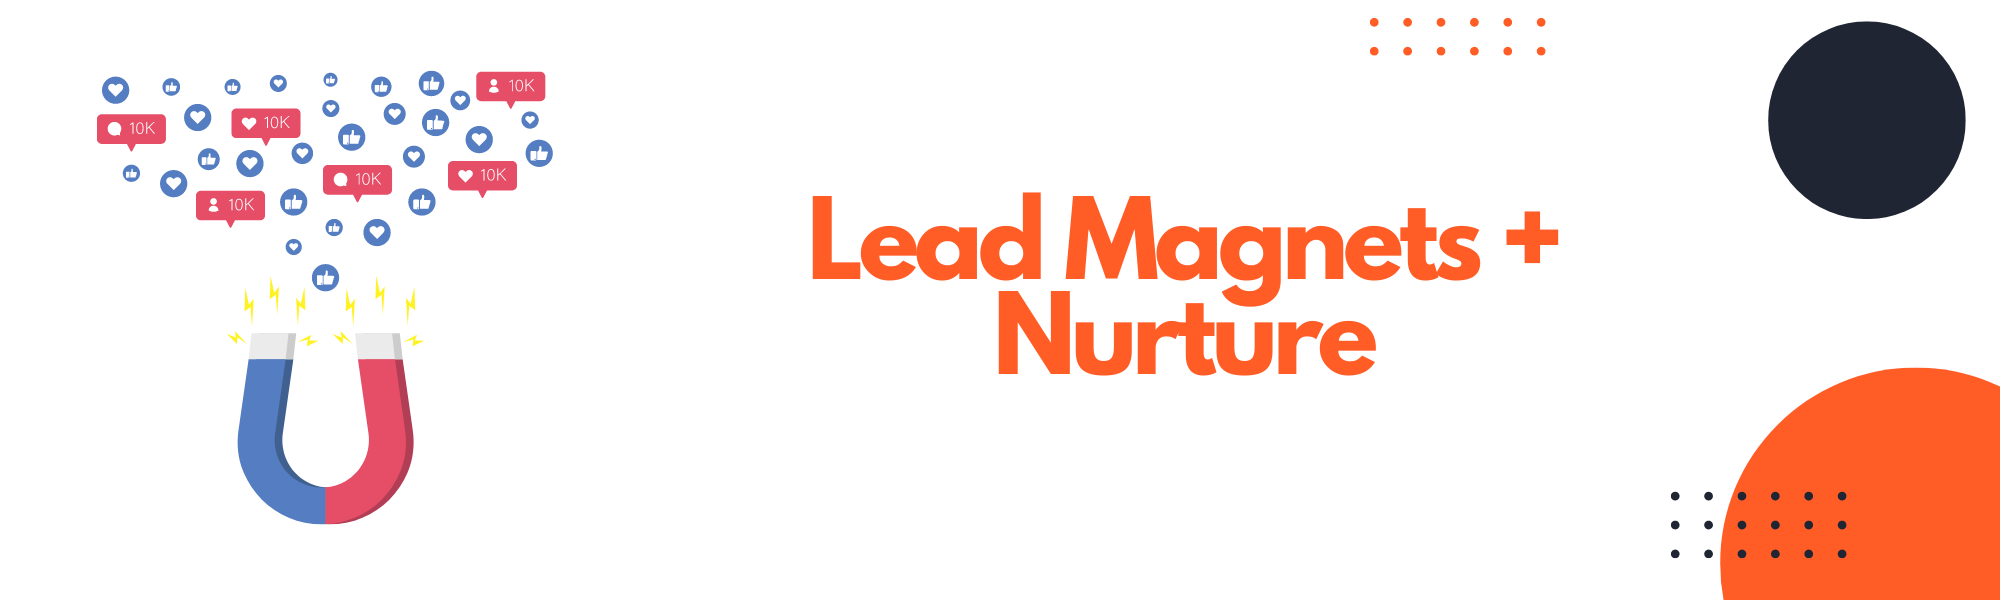 how to get ppc clients with lead magnets